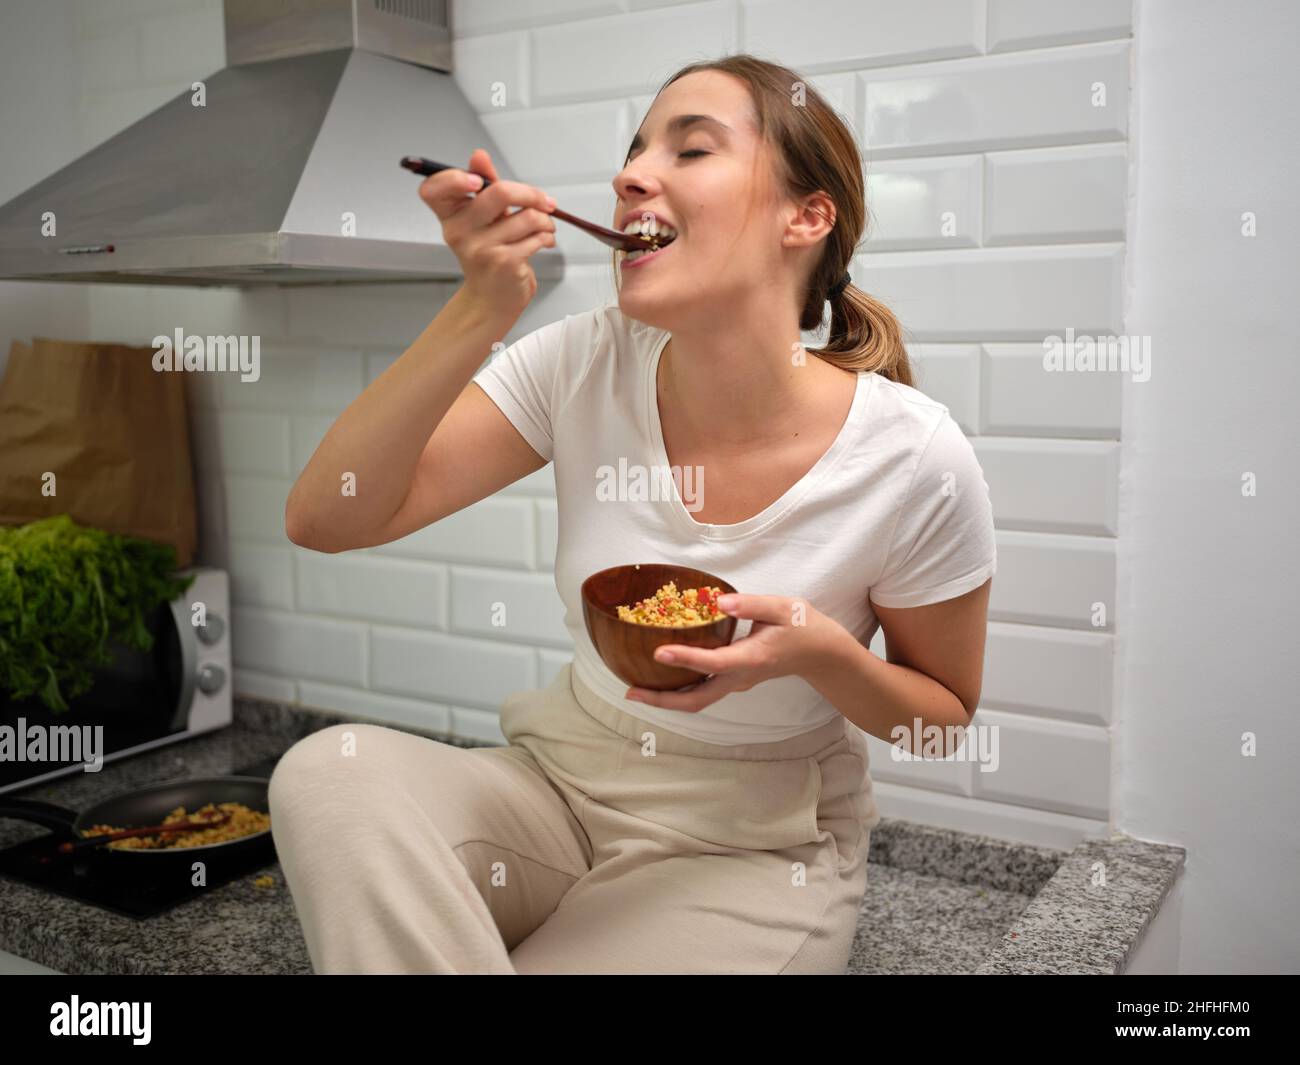 woman picking up food from her fork to put it in her mouth, eating casually on the worktop Stock Photo